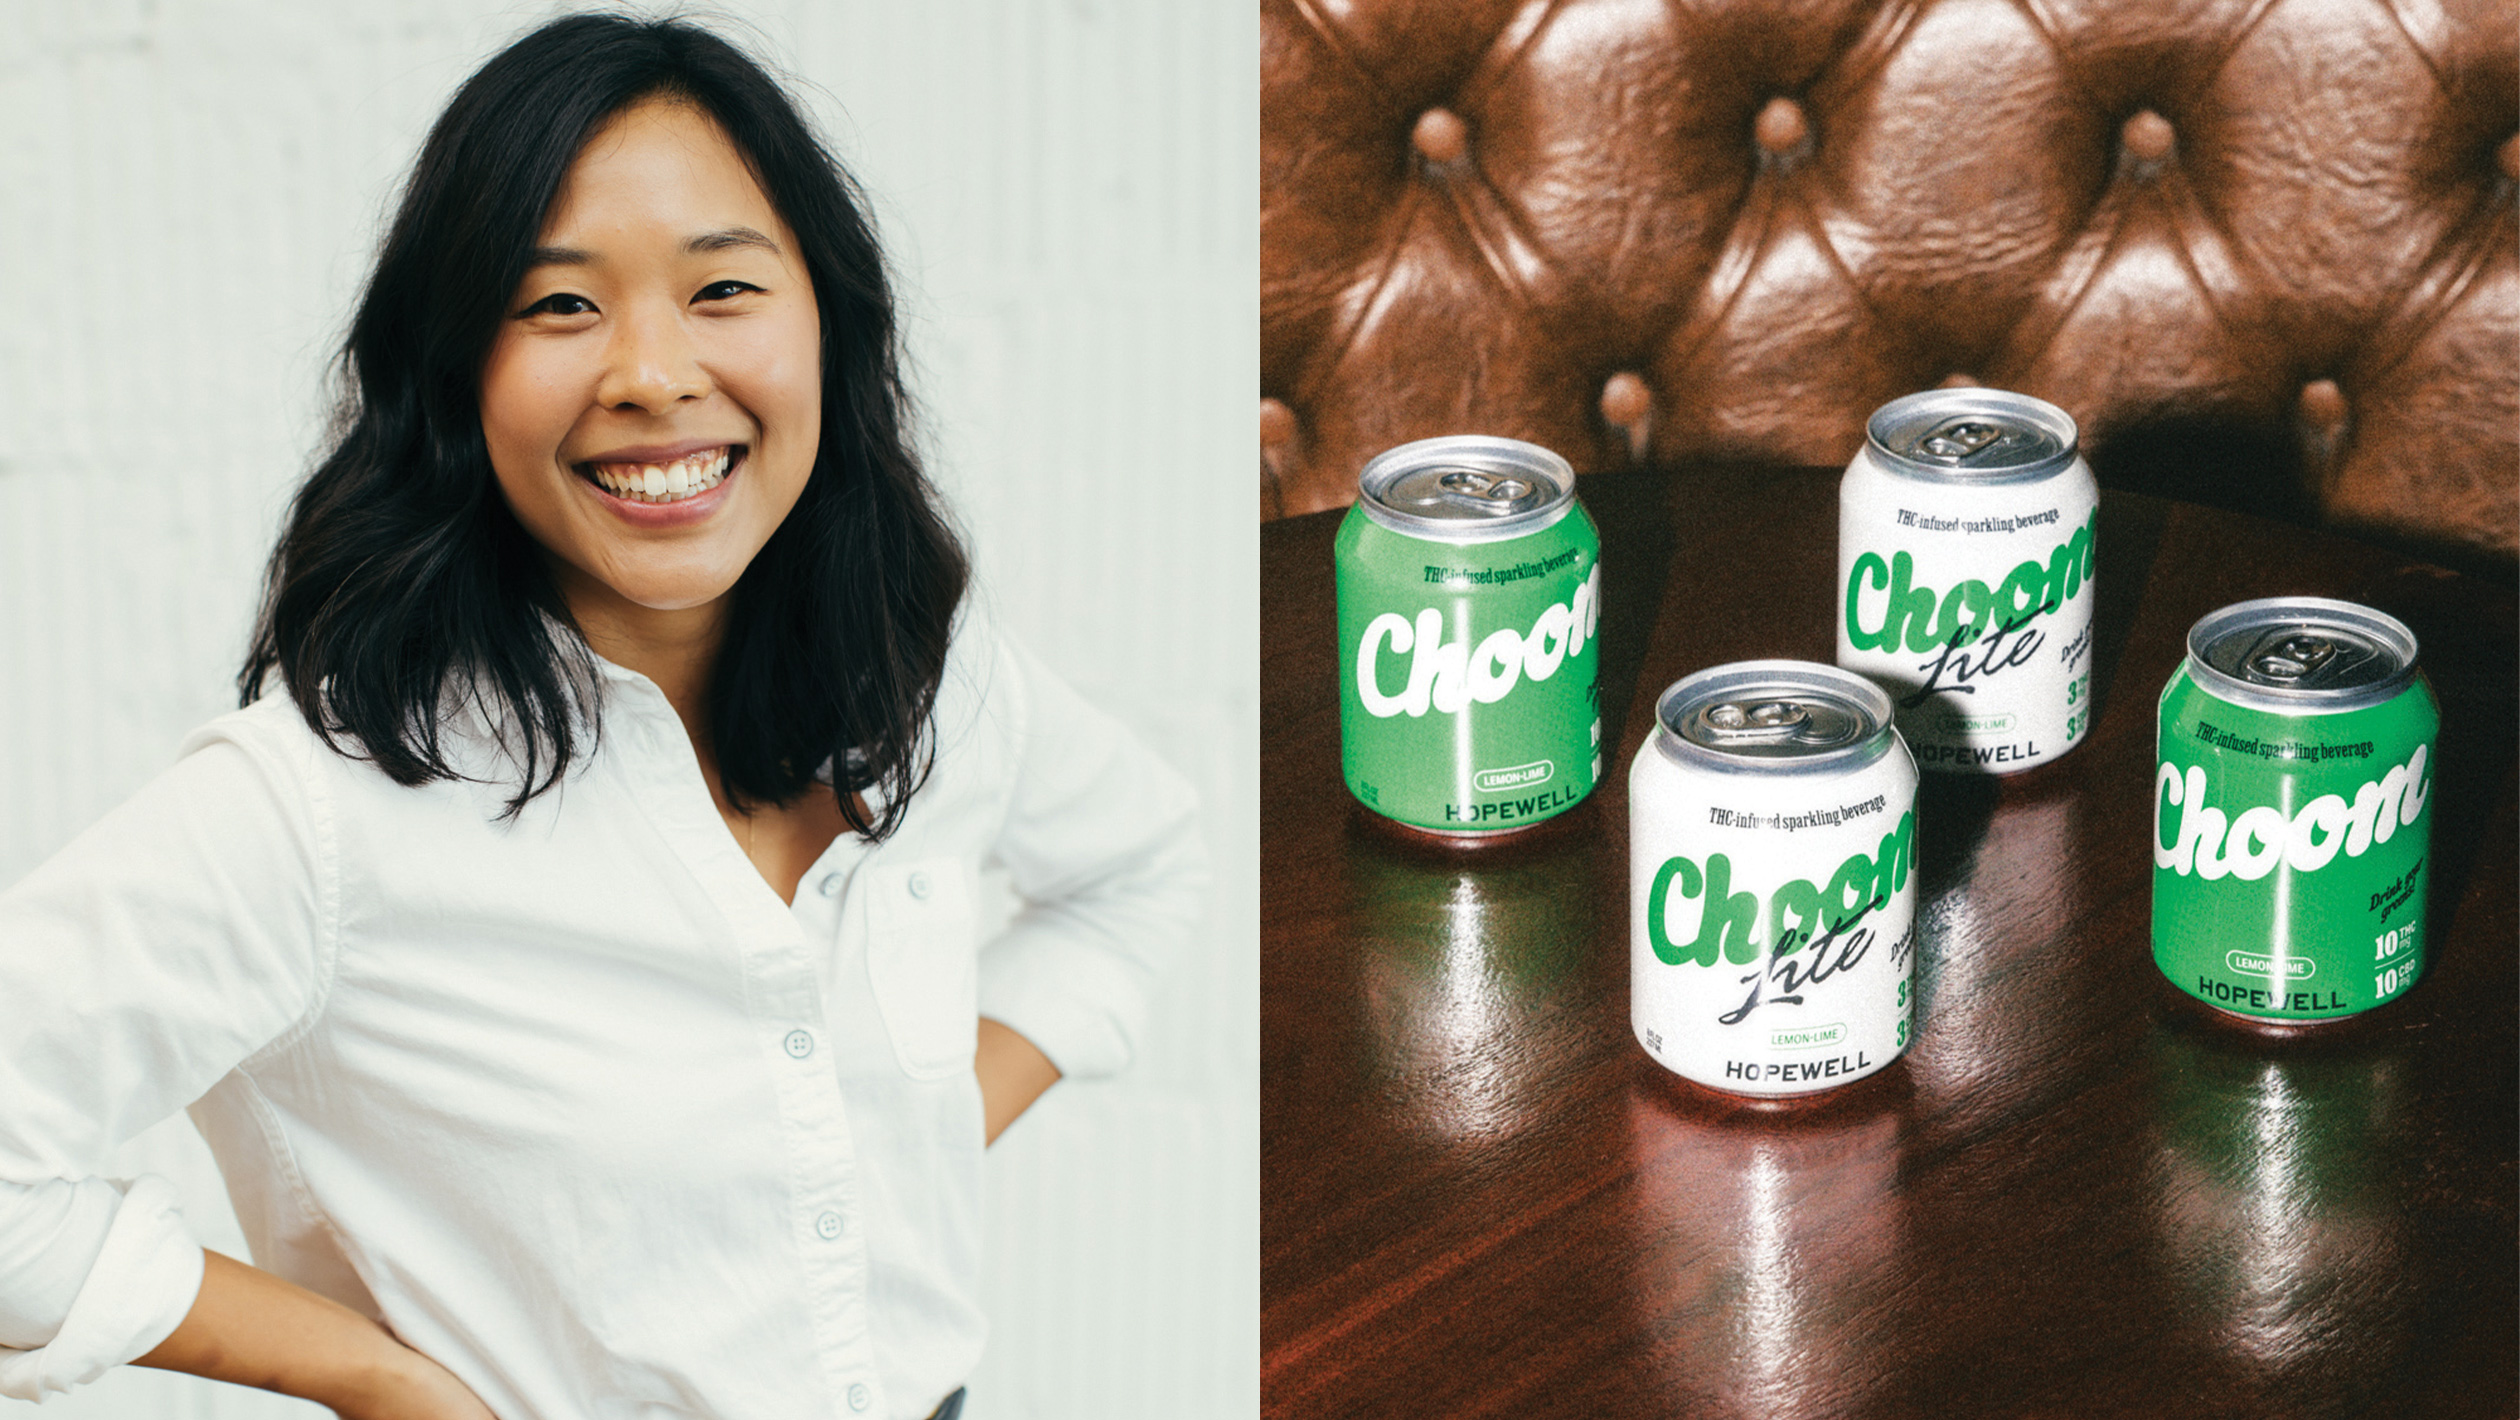 A headshot of Samantha Lee juxtaposed next to a picture of 4 cans of Choom